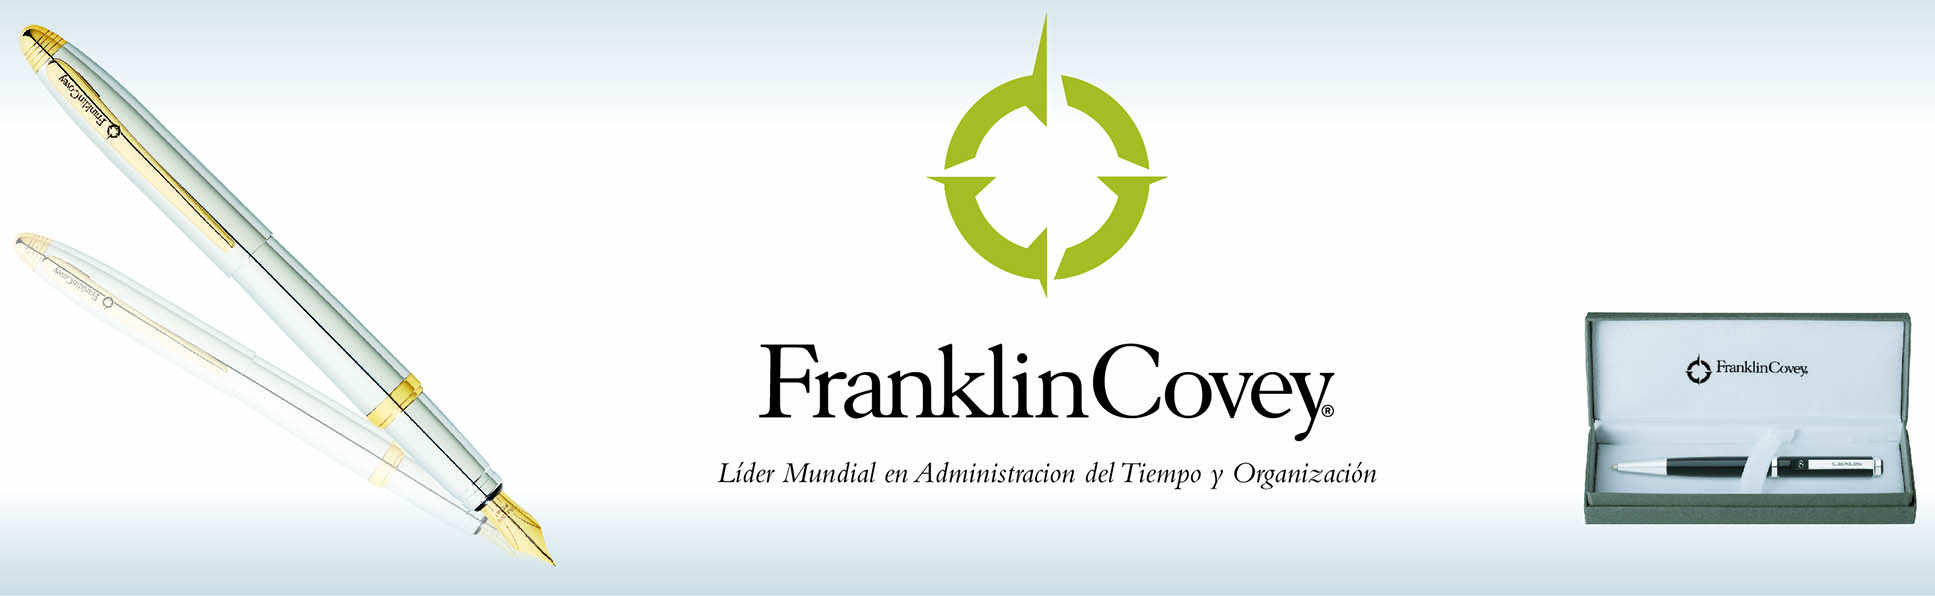 Franklin-Covey